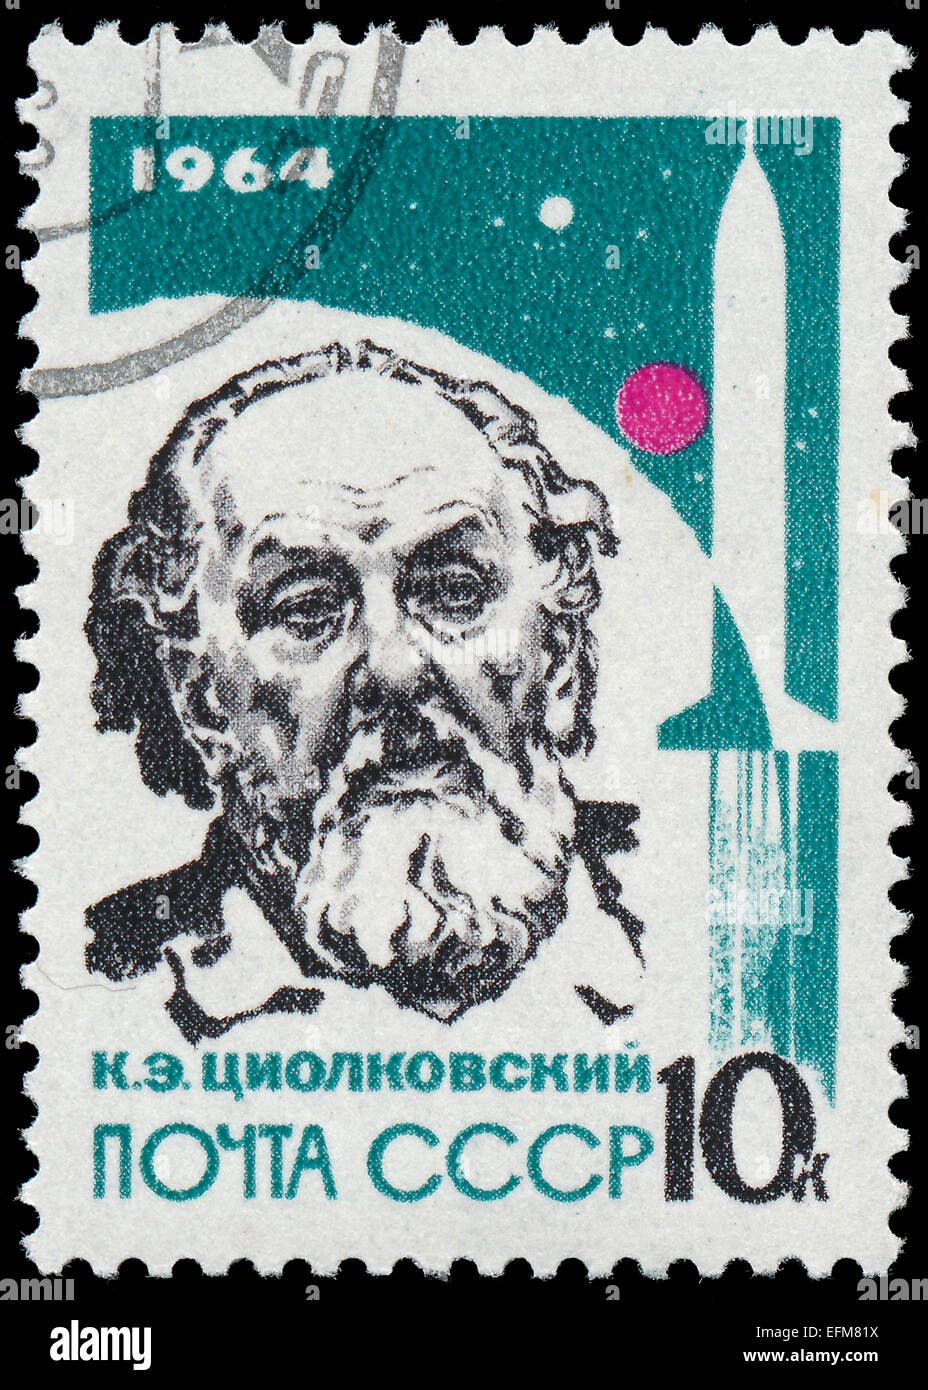 USSR - CIRCA 1964:A post stamp printed by Russia, shows portrait of Konstantin Tsiolkovsky, circa 1964. Stock Photo